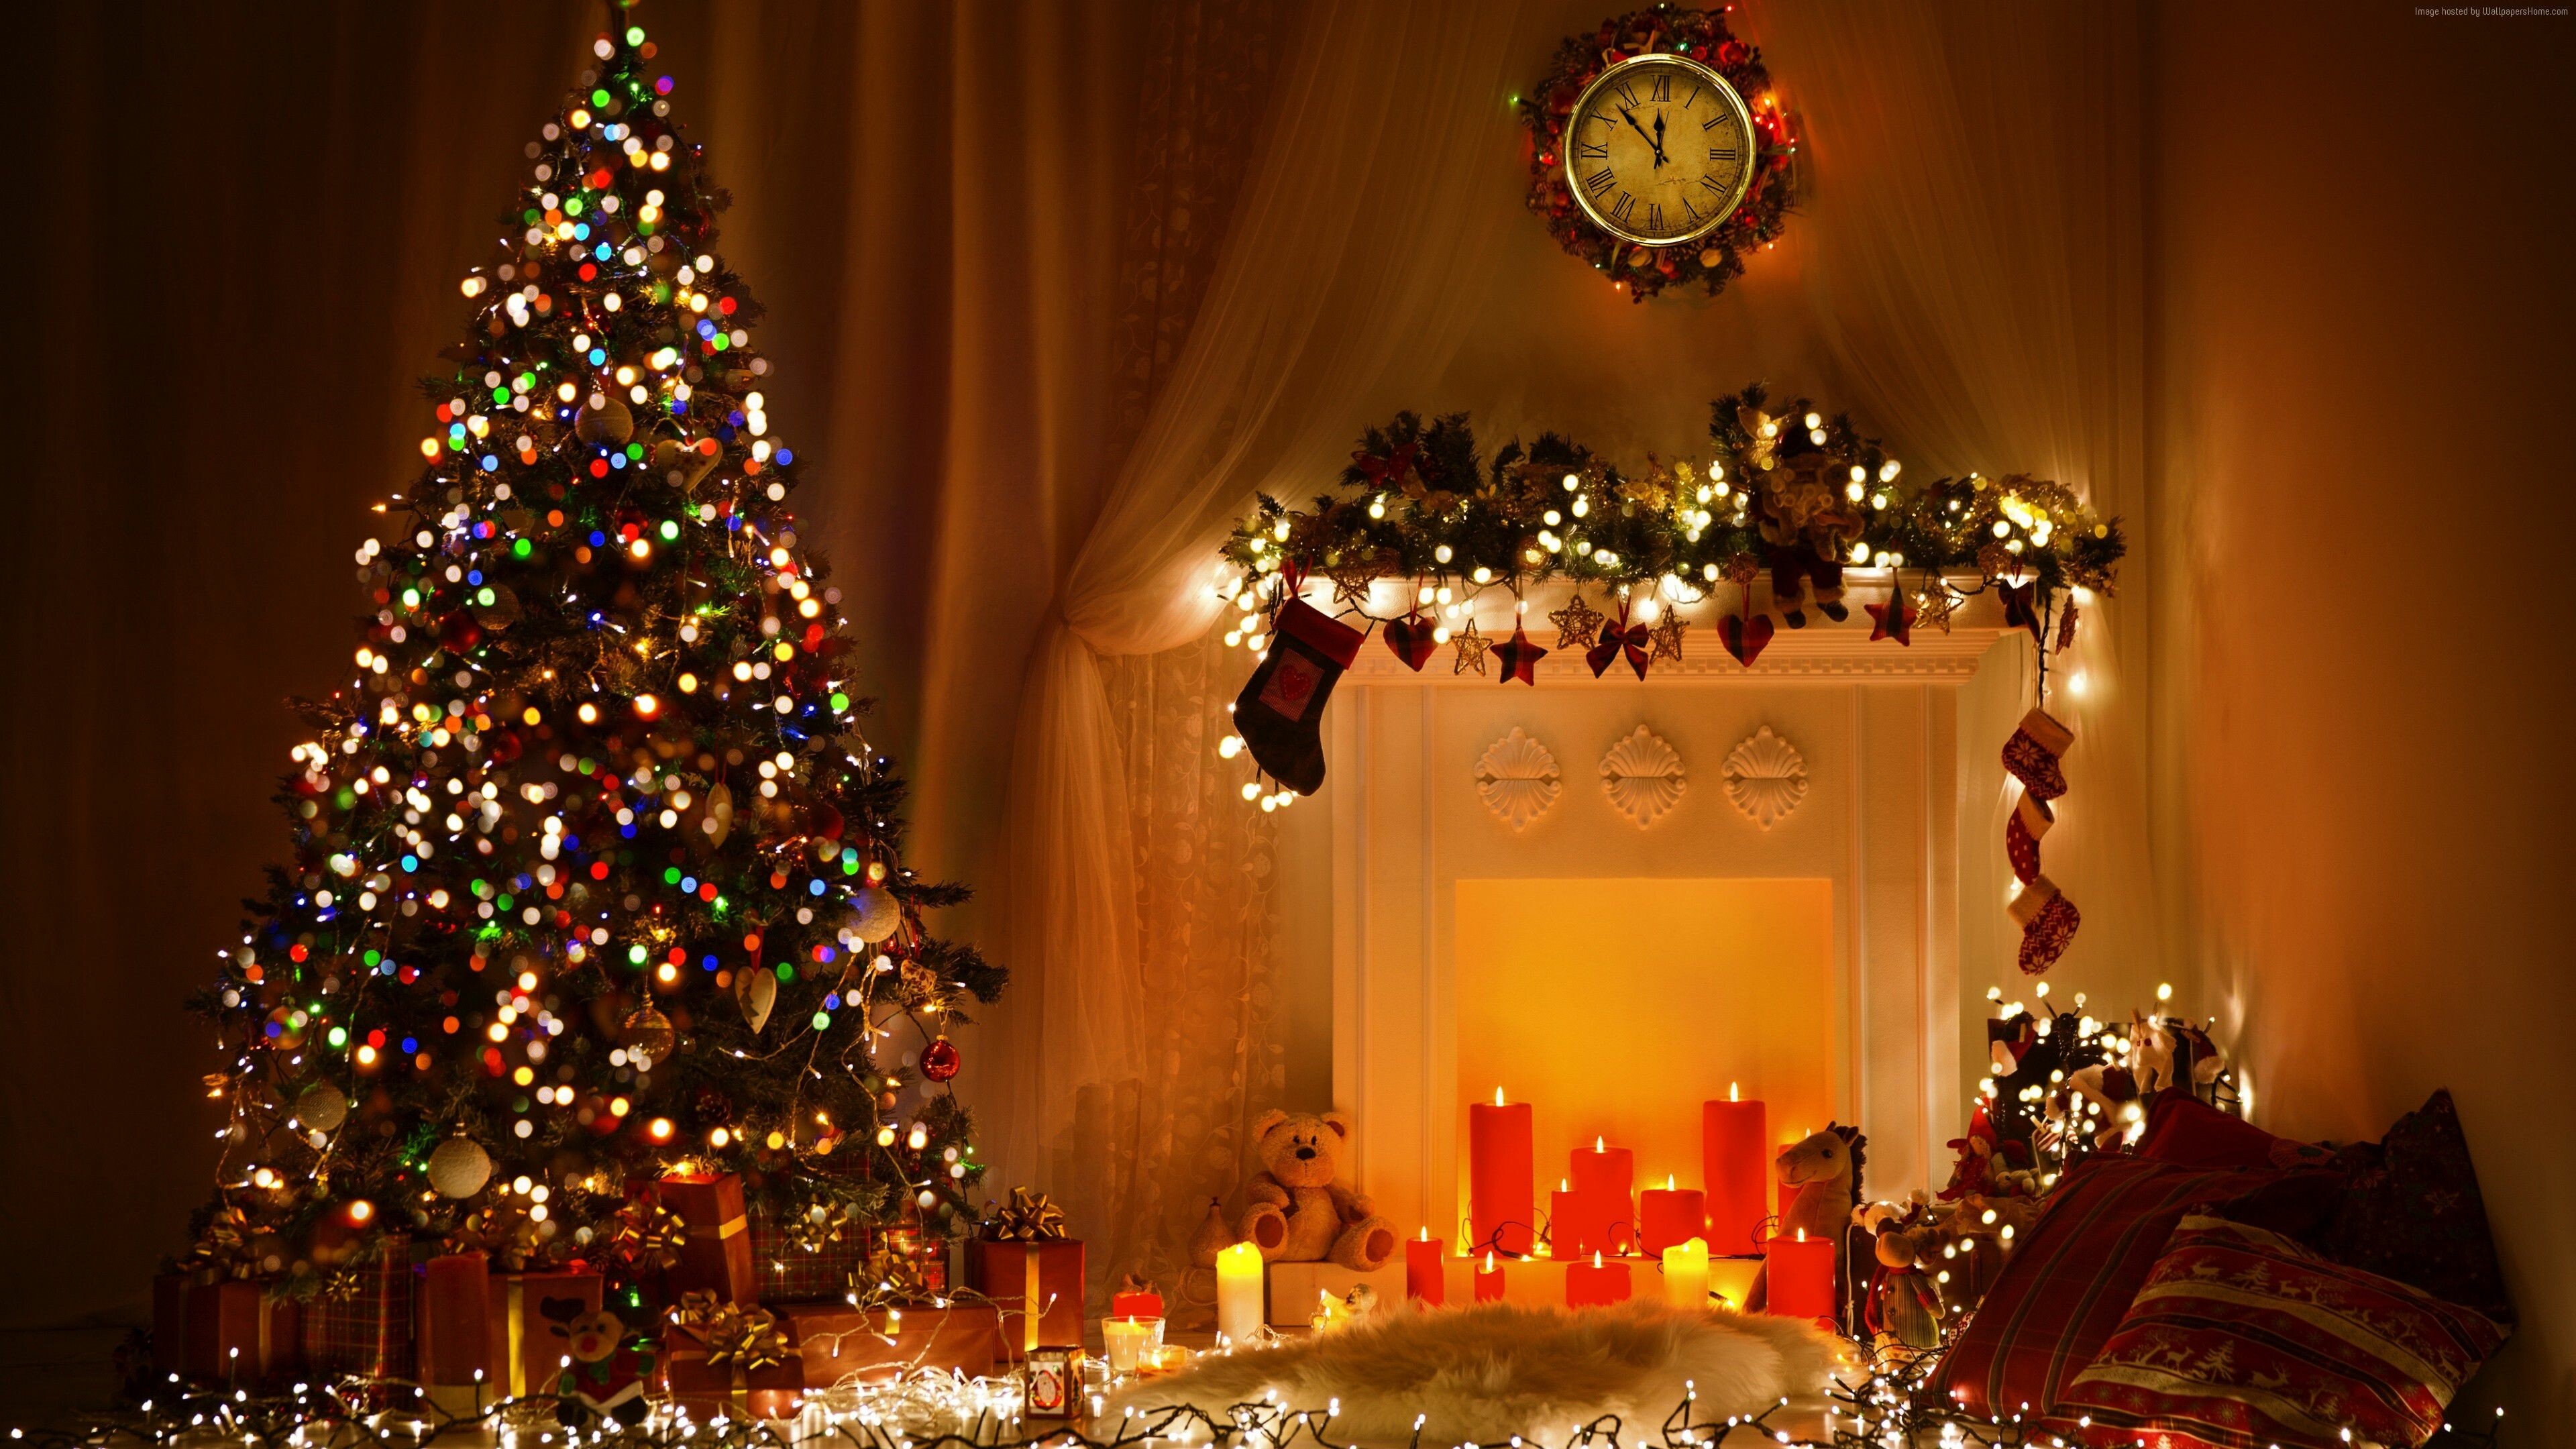 Christmas Ornament: New Year toys, Tree, Fireplace, Decorations. 3840x2160 4K Background.